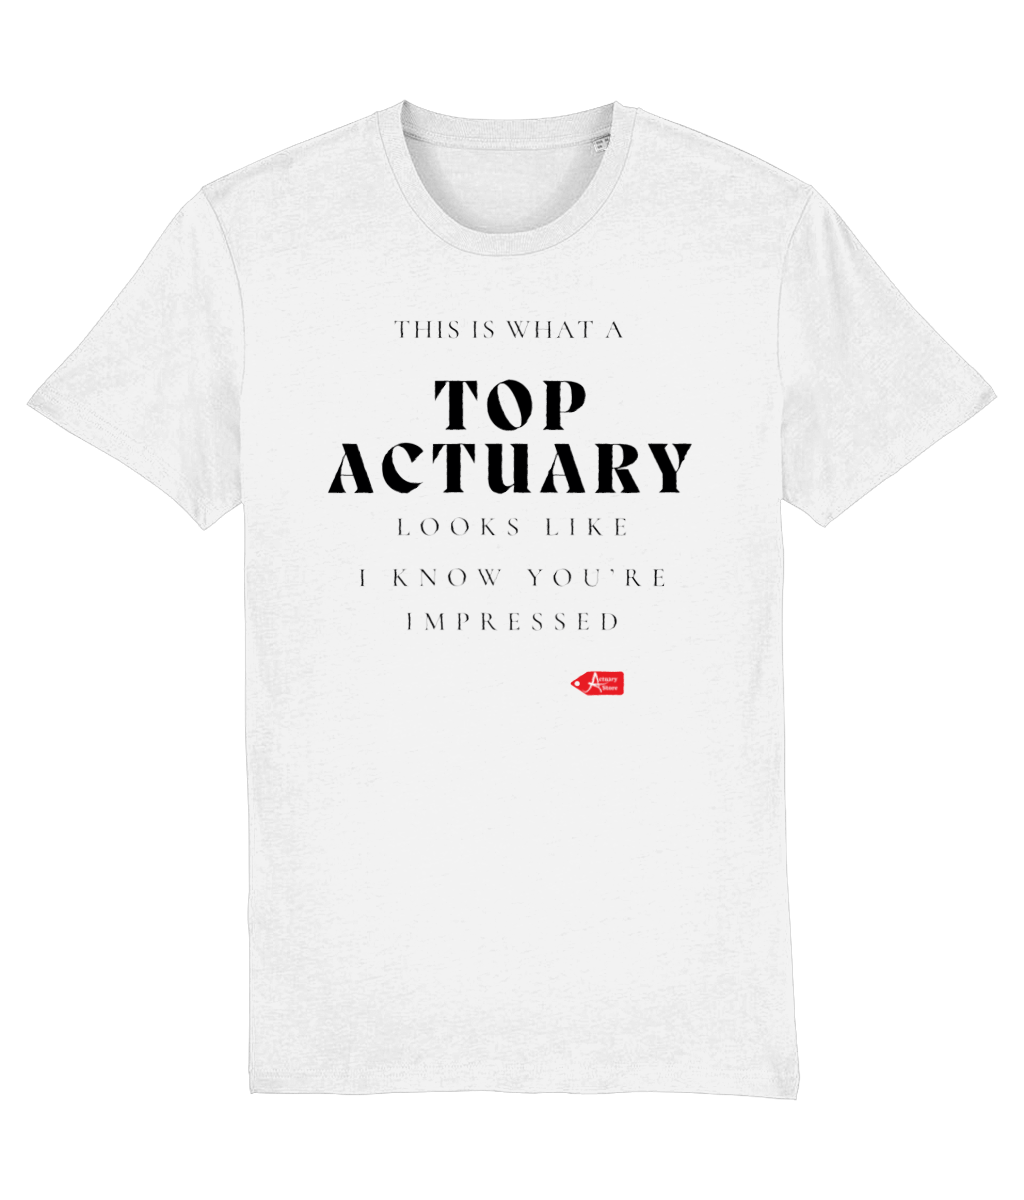 This is What A Top Actuary Looks Like T-Shirt